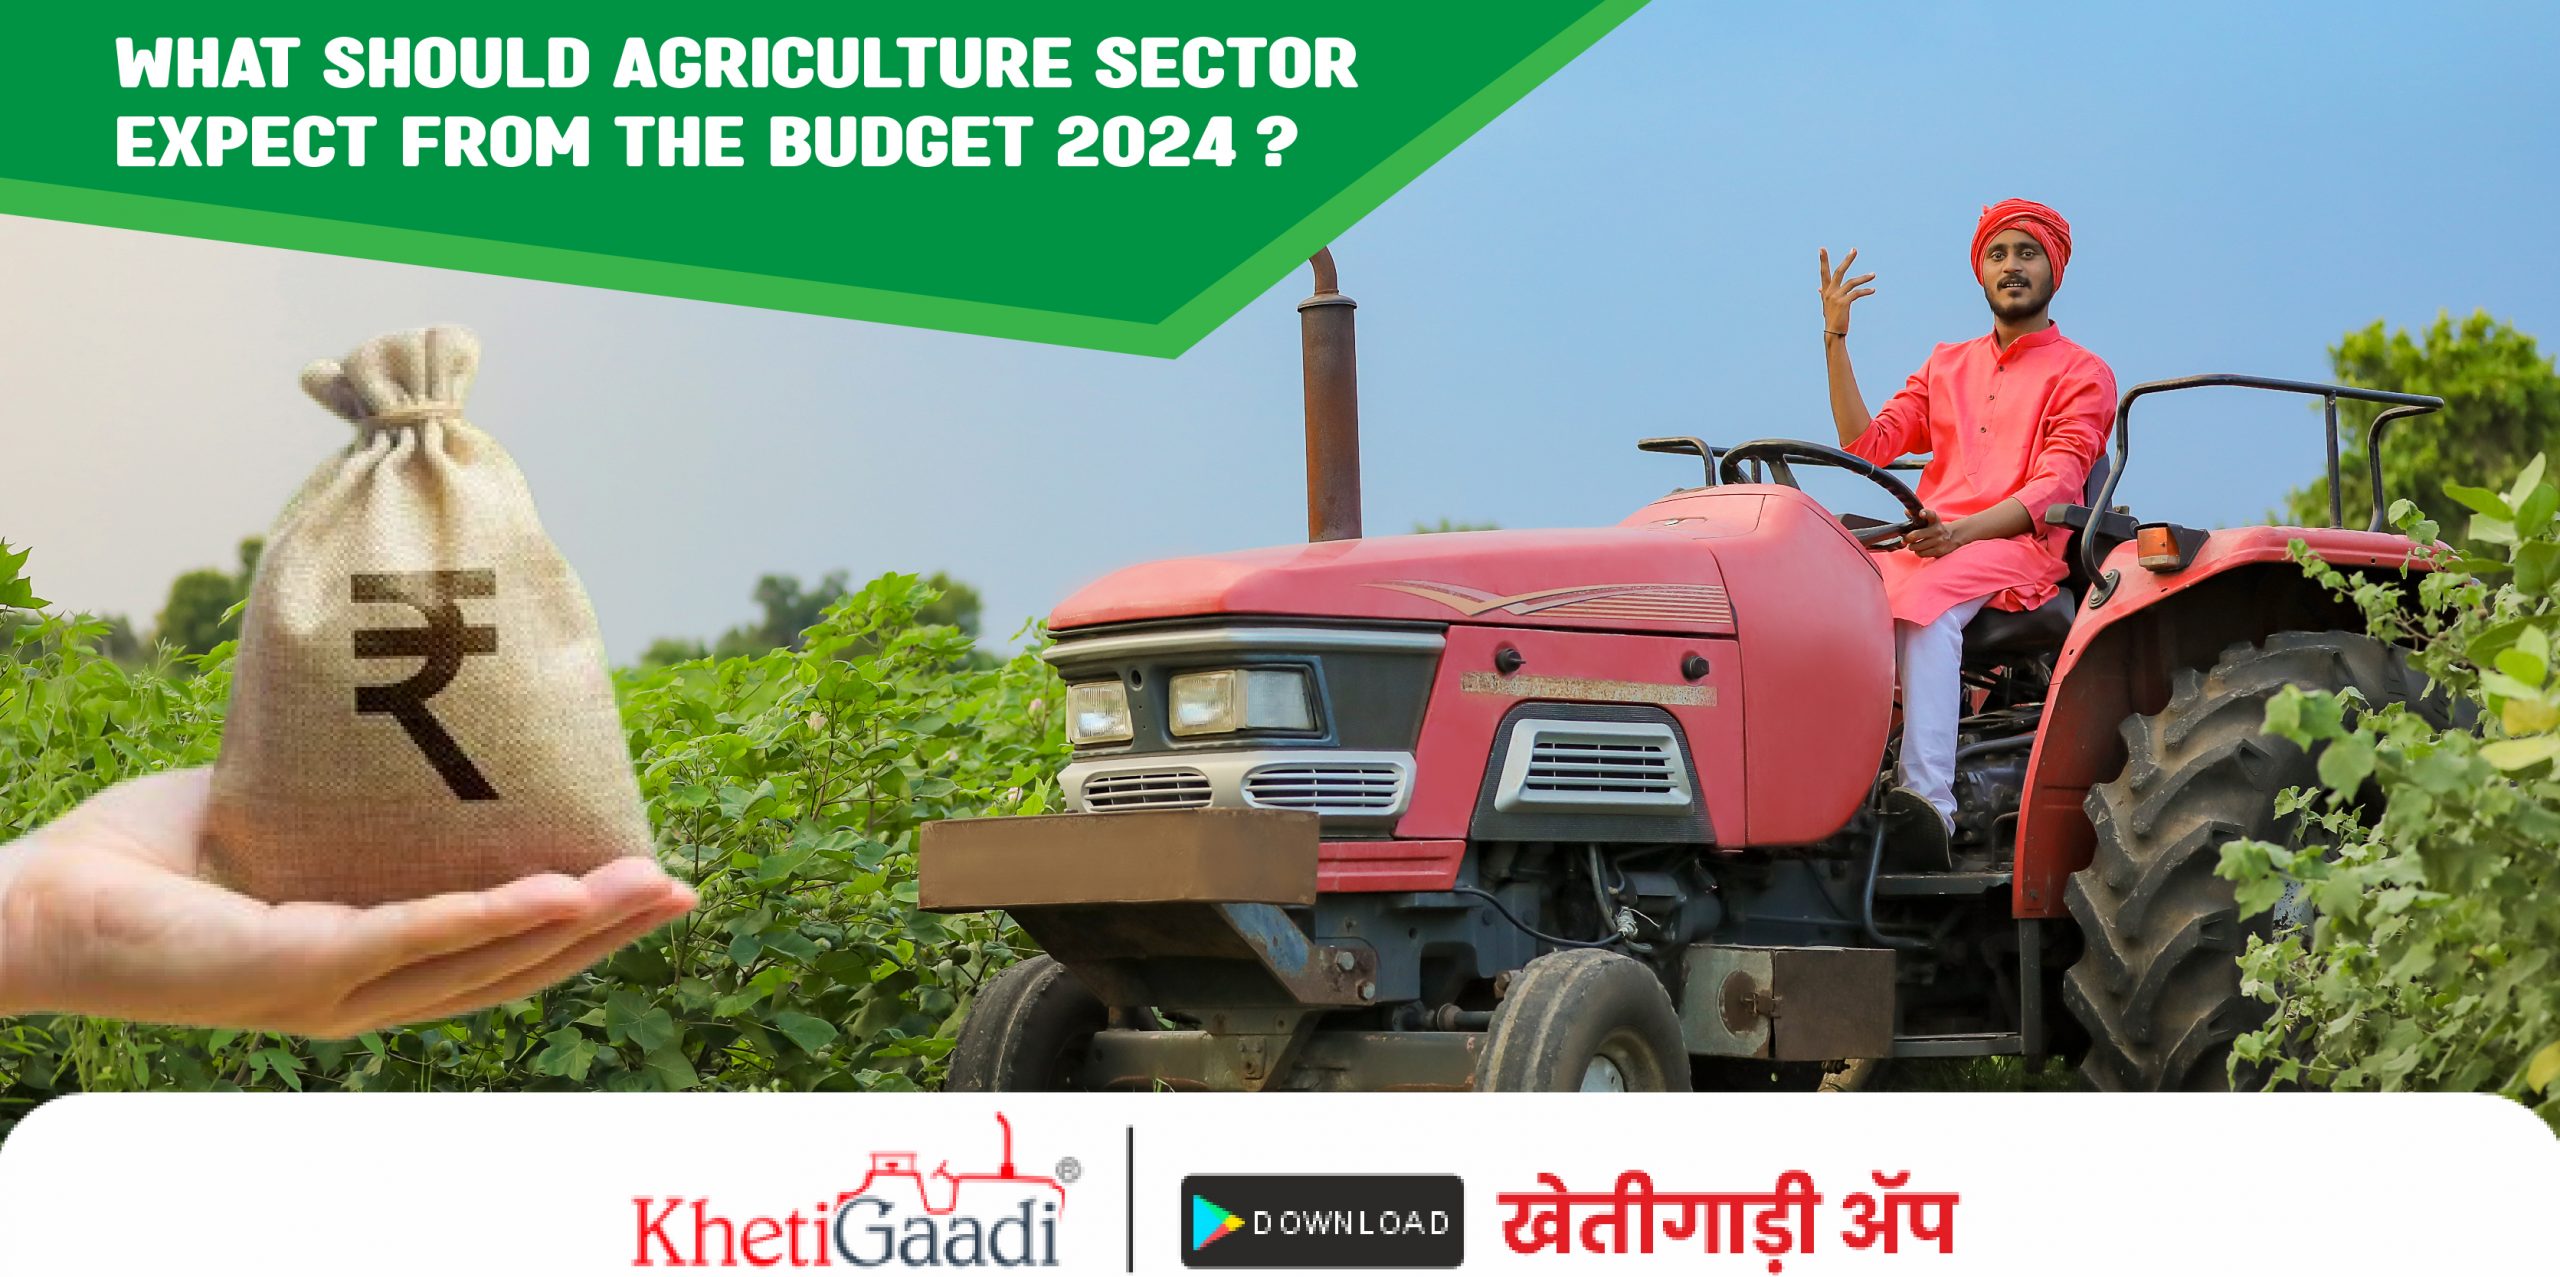 What Should Agriculture Sector Expect from the budget 2024?